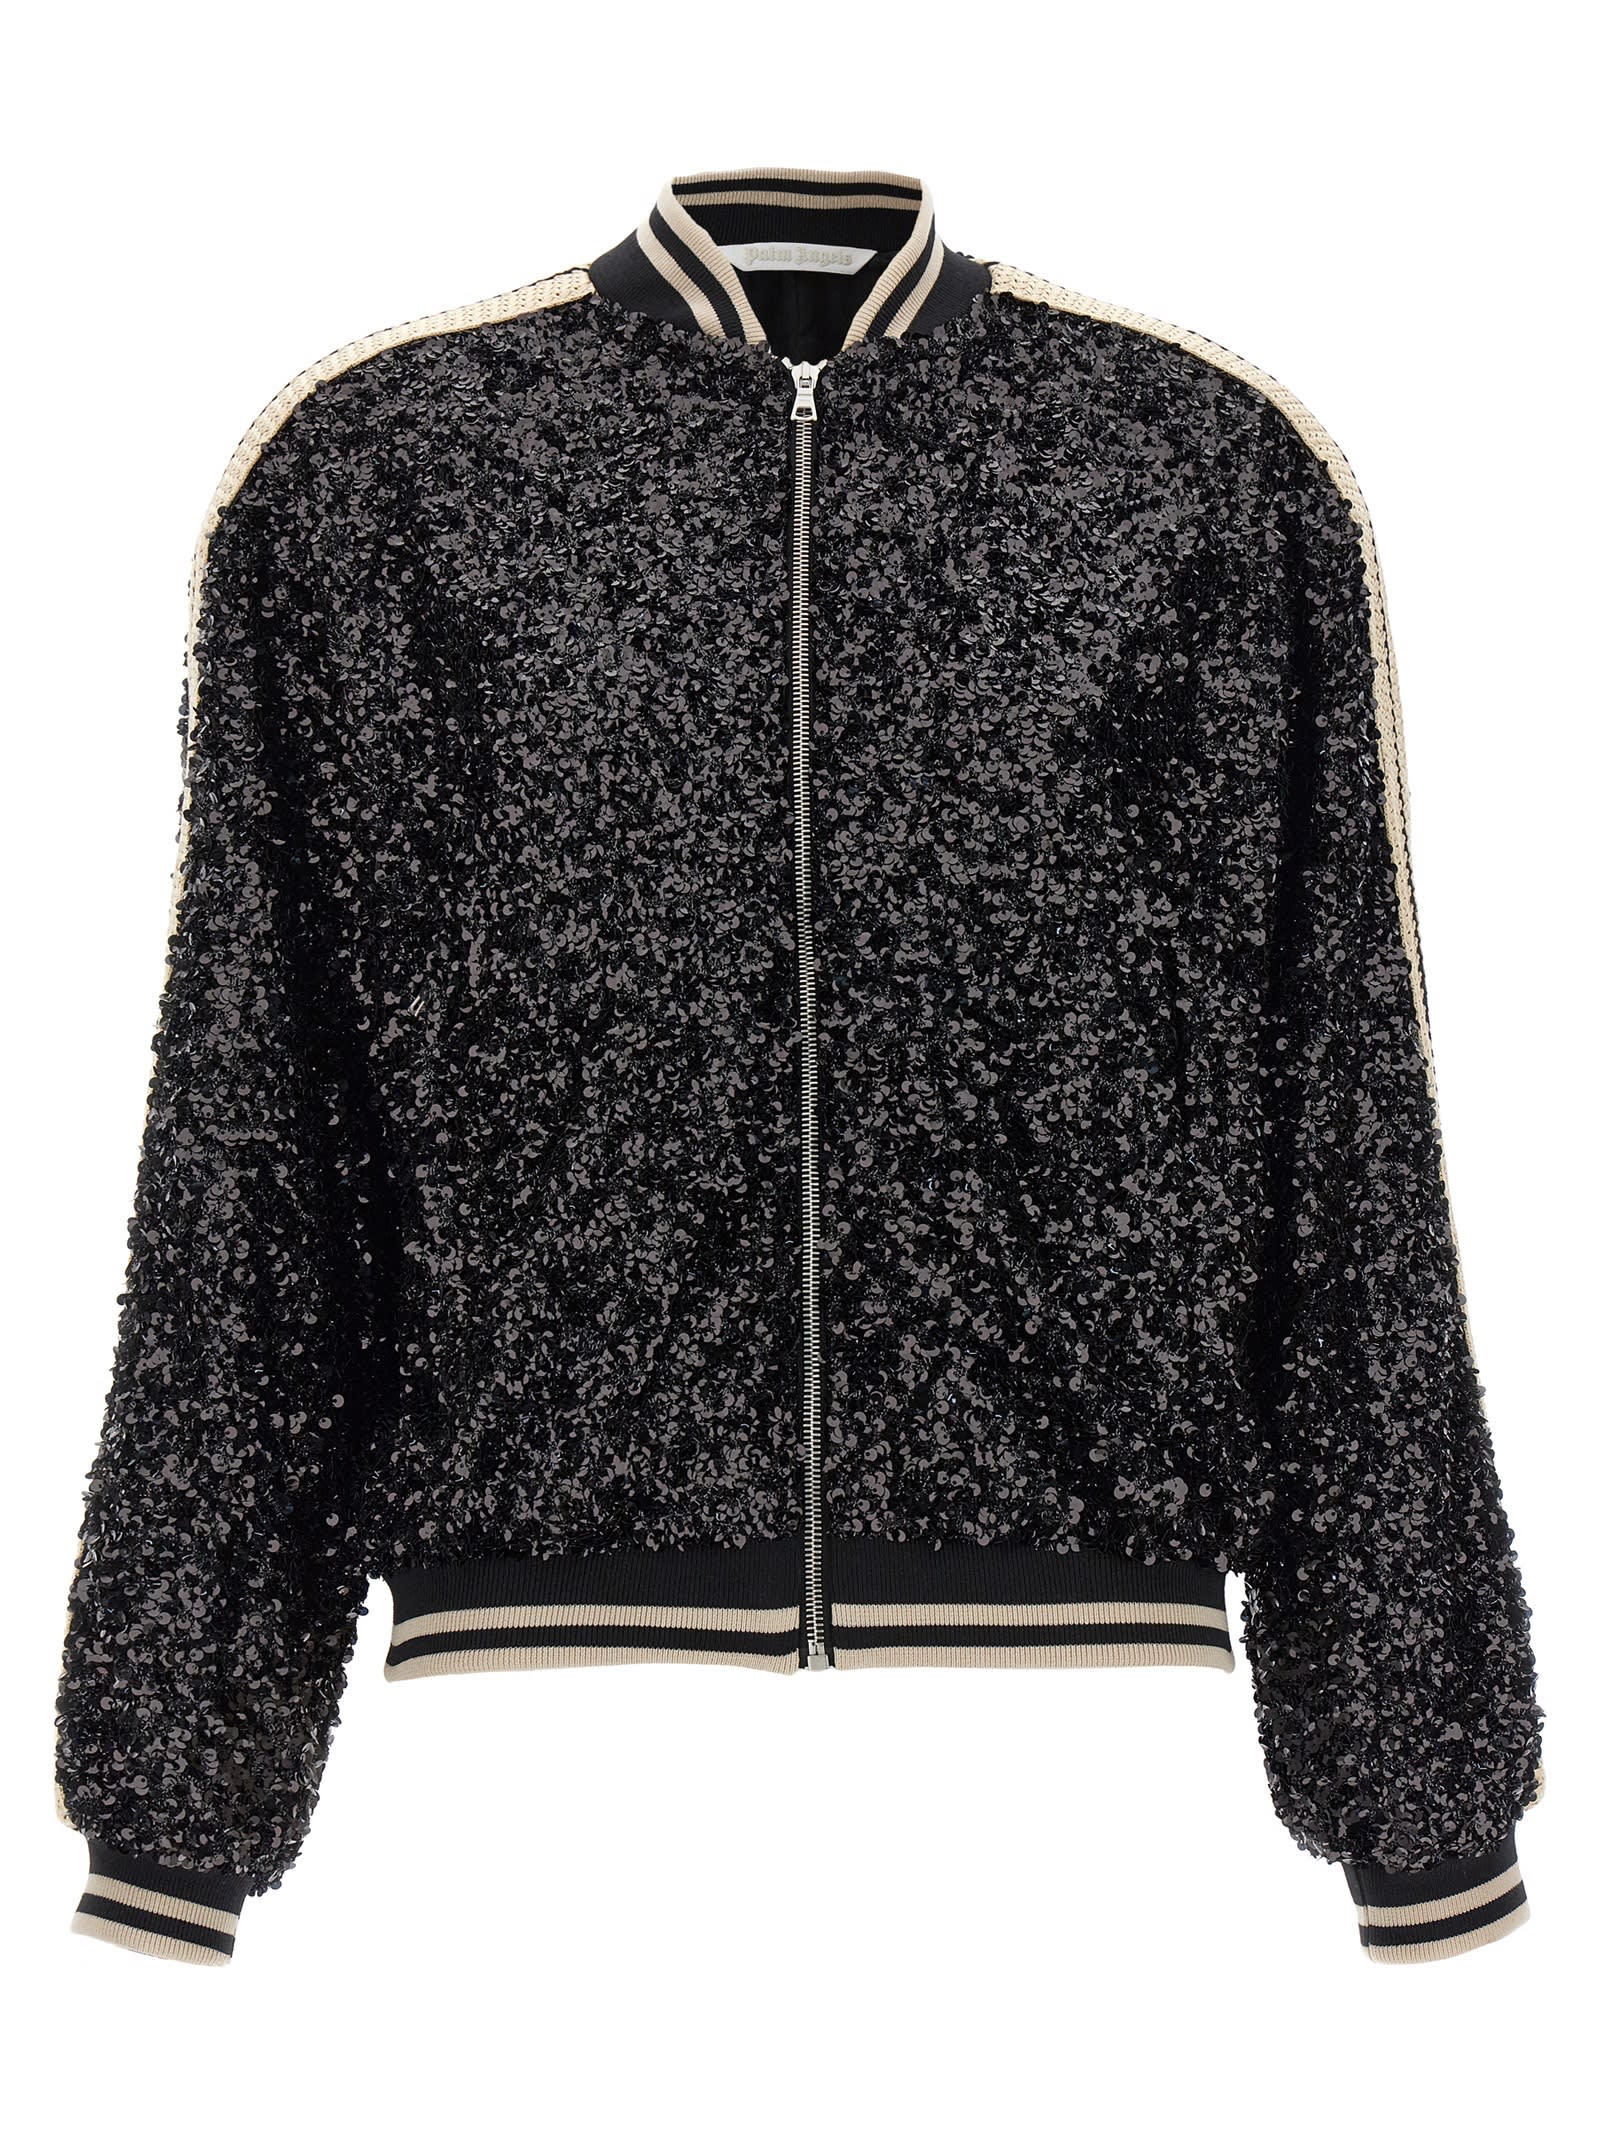 PALM ANGELS SOIREE SEQUIN BOMBER JACKET